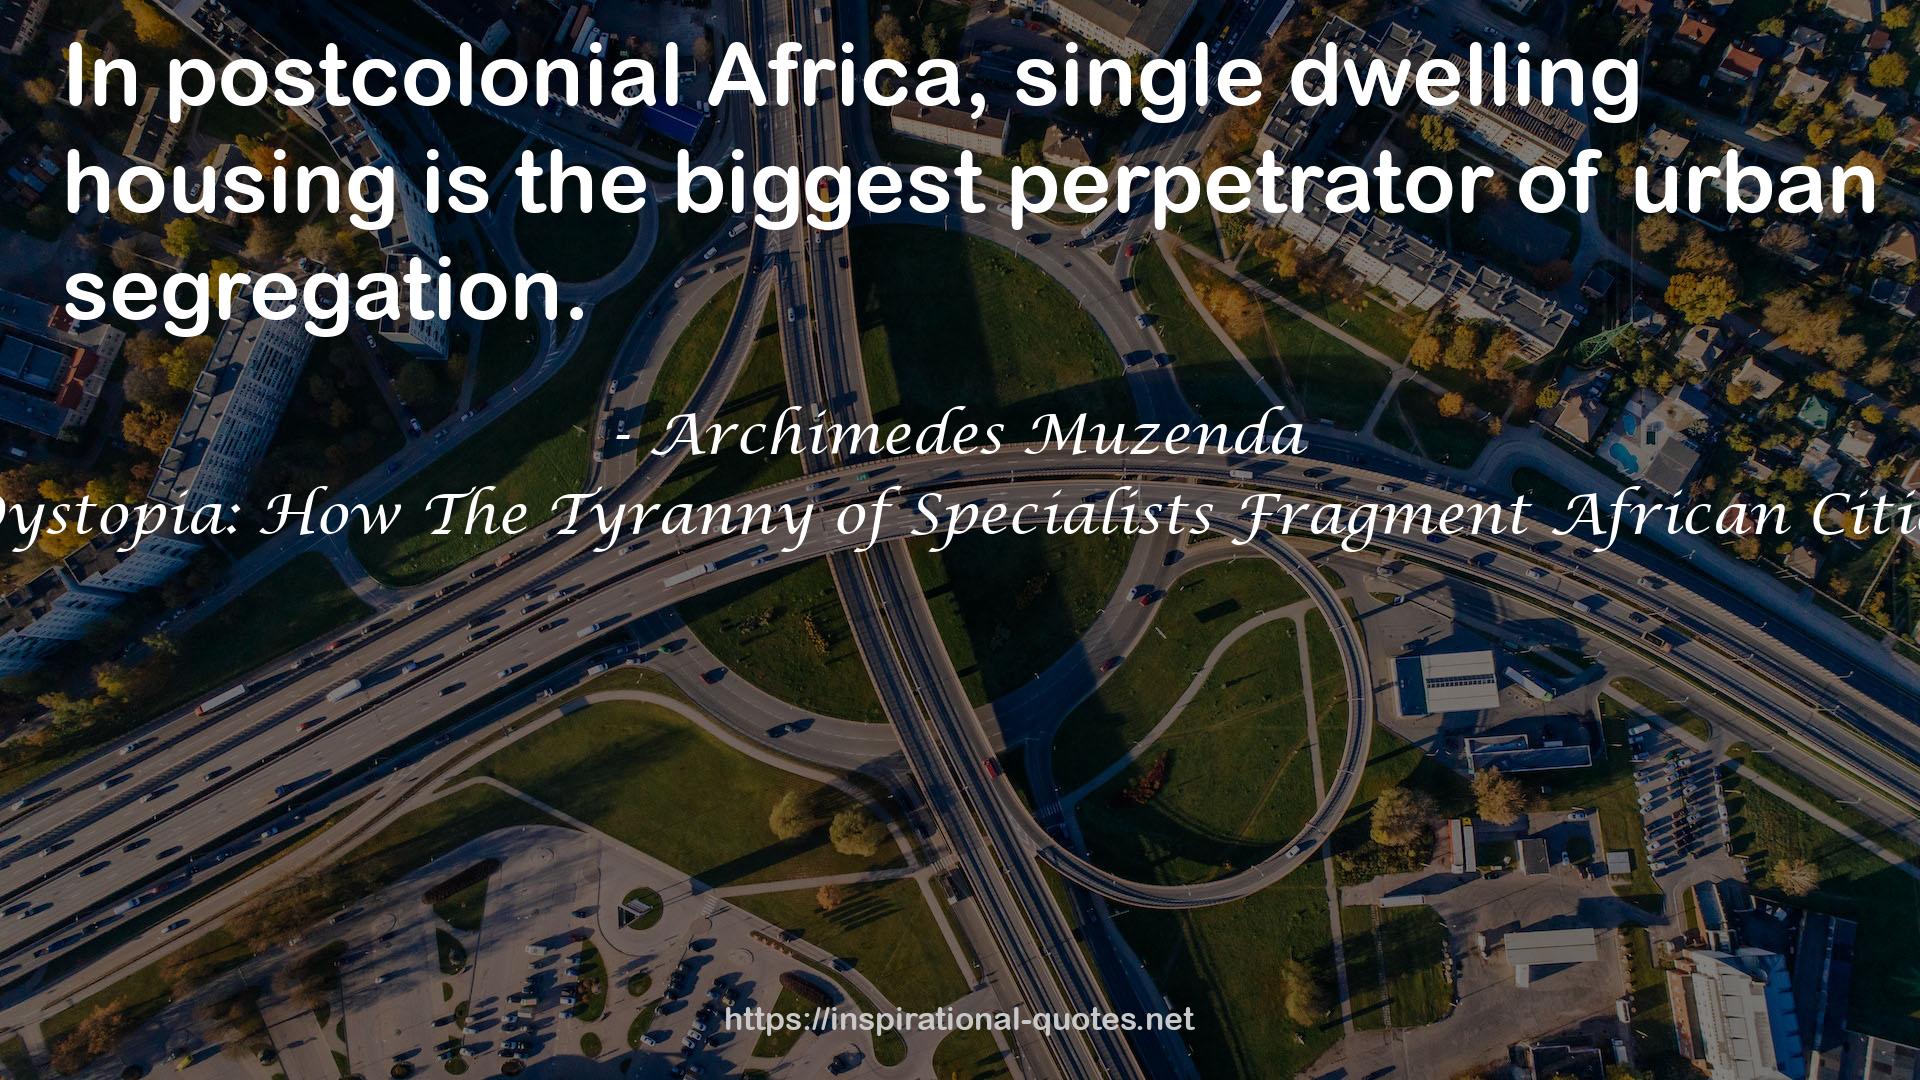 Dystopia: How The Tyranny of Specialists Fragment African Cities QUOTES